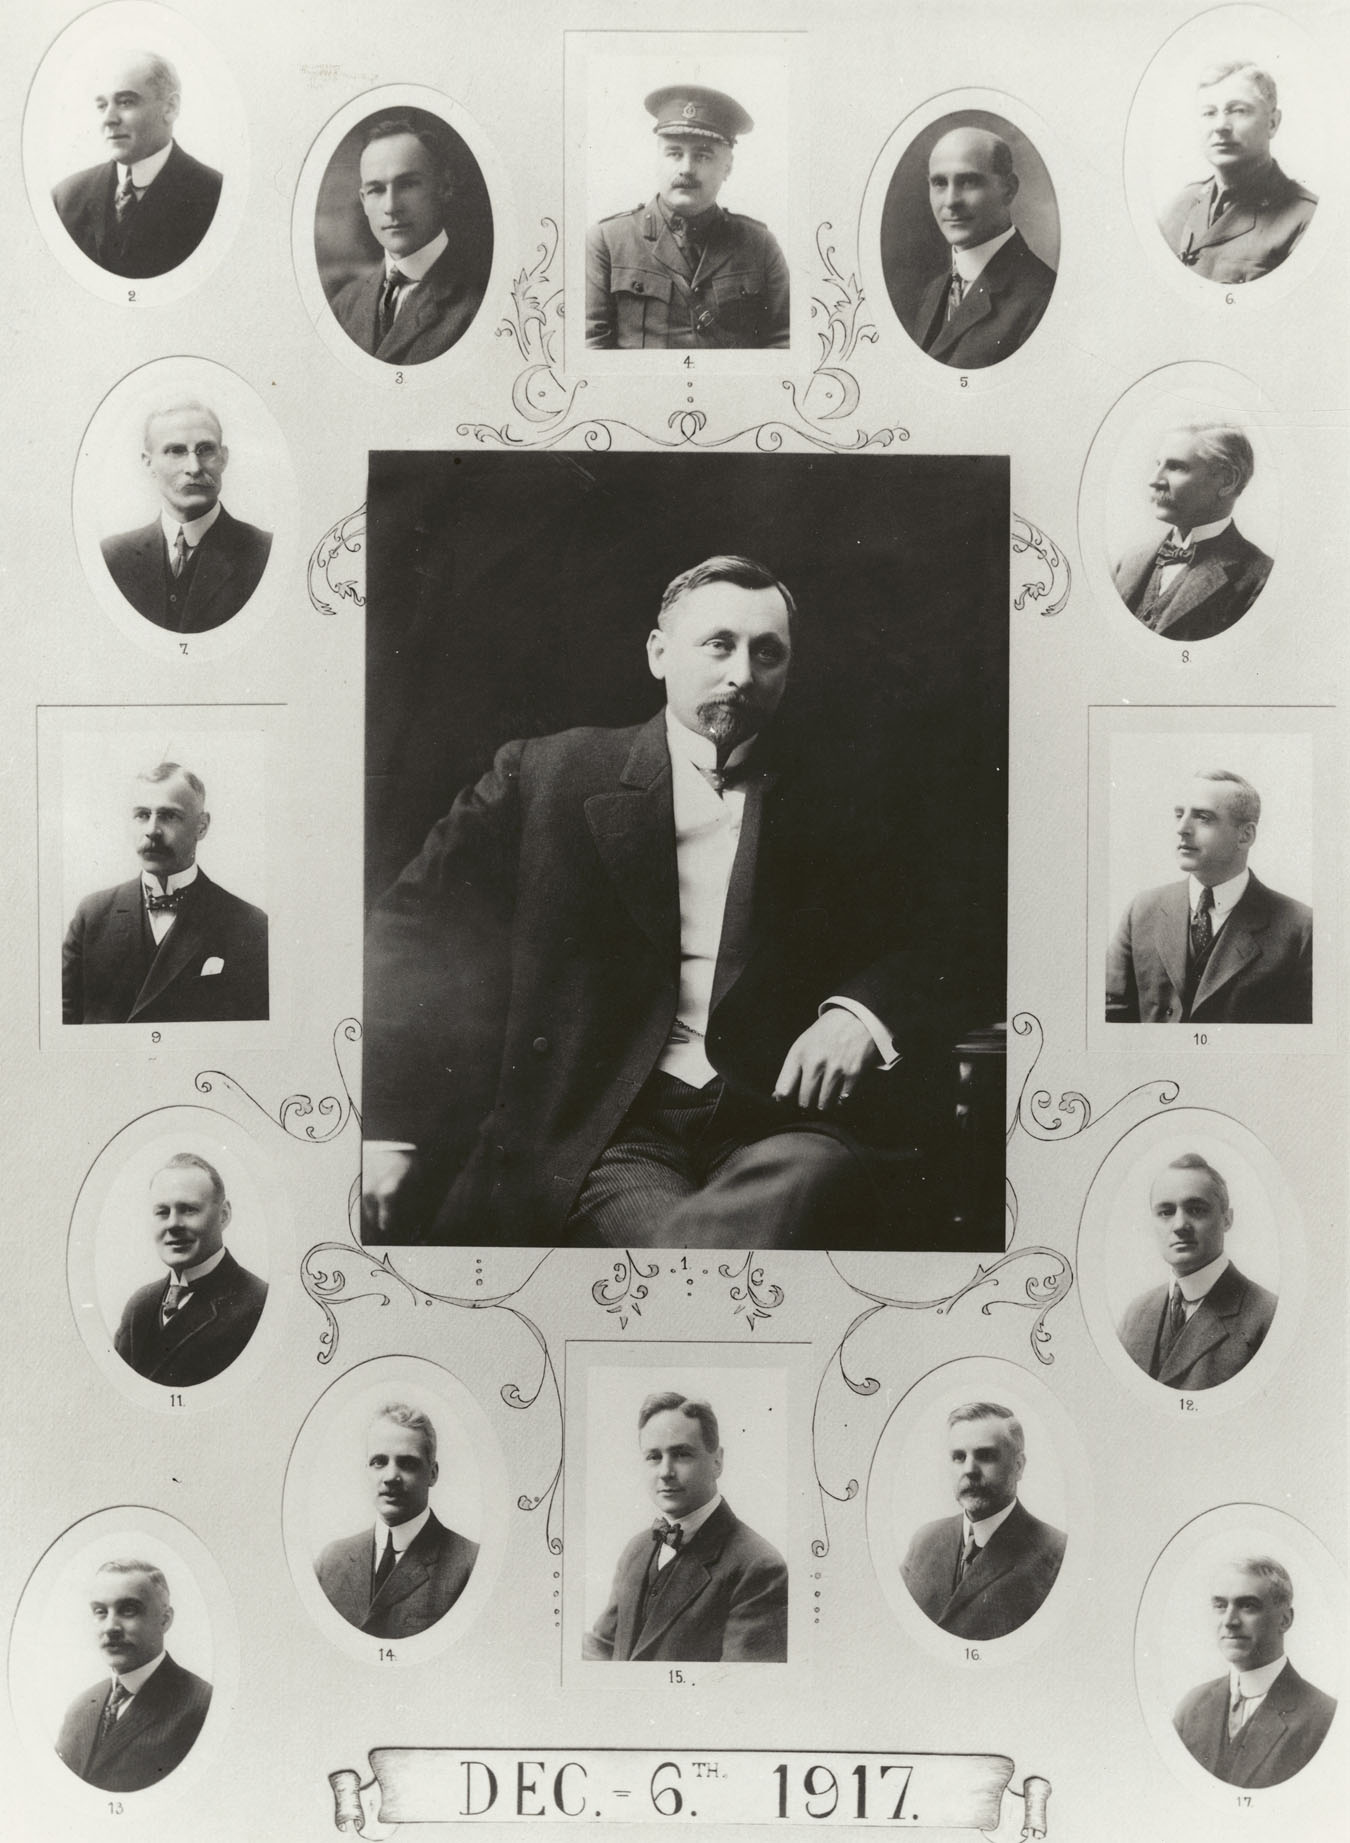 The Halifax Relief Committee was established to deal with the emergency resulting from the Explosion of December 6, 1917.  Its members, responsible for coordinating relief work, were as follows:                                                     1.  R.T. MacIlreith,    Managing Committee;                                                           2.  H. Milburn,   Medical Supply Committee;                                                           3.  F.A. Gillis, Transportation Committee;                                                              4.  Col. F. McKelvie Bell,  Medical Committee;                                                     5. A.S. Barnstead,  Mortuary Committee;                                                             6.  Capt. Kneale,  Employment Committee;                                                           7.  Hon. R.G. Beazley,  Fuel Committee;                                                                8.  A.S. Campbell,   Finance Committee;                                                              9.  A. Hanfield Whitman,  Supply Committee;                                                     10.  J.L. Hetherington,    Food Committee;                                                         11.  J.C. Stredder,   Information Committee;                                                        12.  G. Fred Pearson,   Reconstruction Committee;                                            13.  C.W. Ackhurst,    Clothing Committee;                                                          14.  J.H. Winfield,  Rehabilitation Committee;                                                   15.  Ralph P. Bell , Secretary;                                                                              16.  W. S. Davidson,  Emergency Shelter;                                                           17.  A.D. MacRae,   Registration Committee.